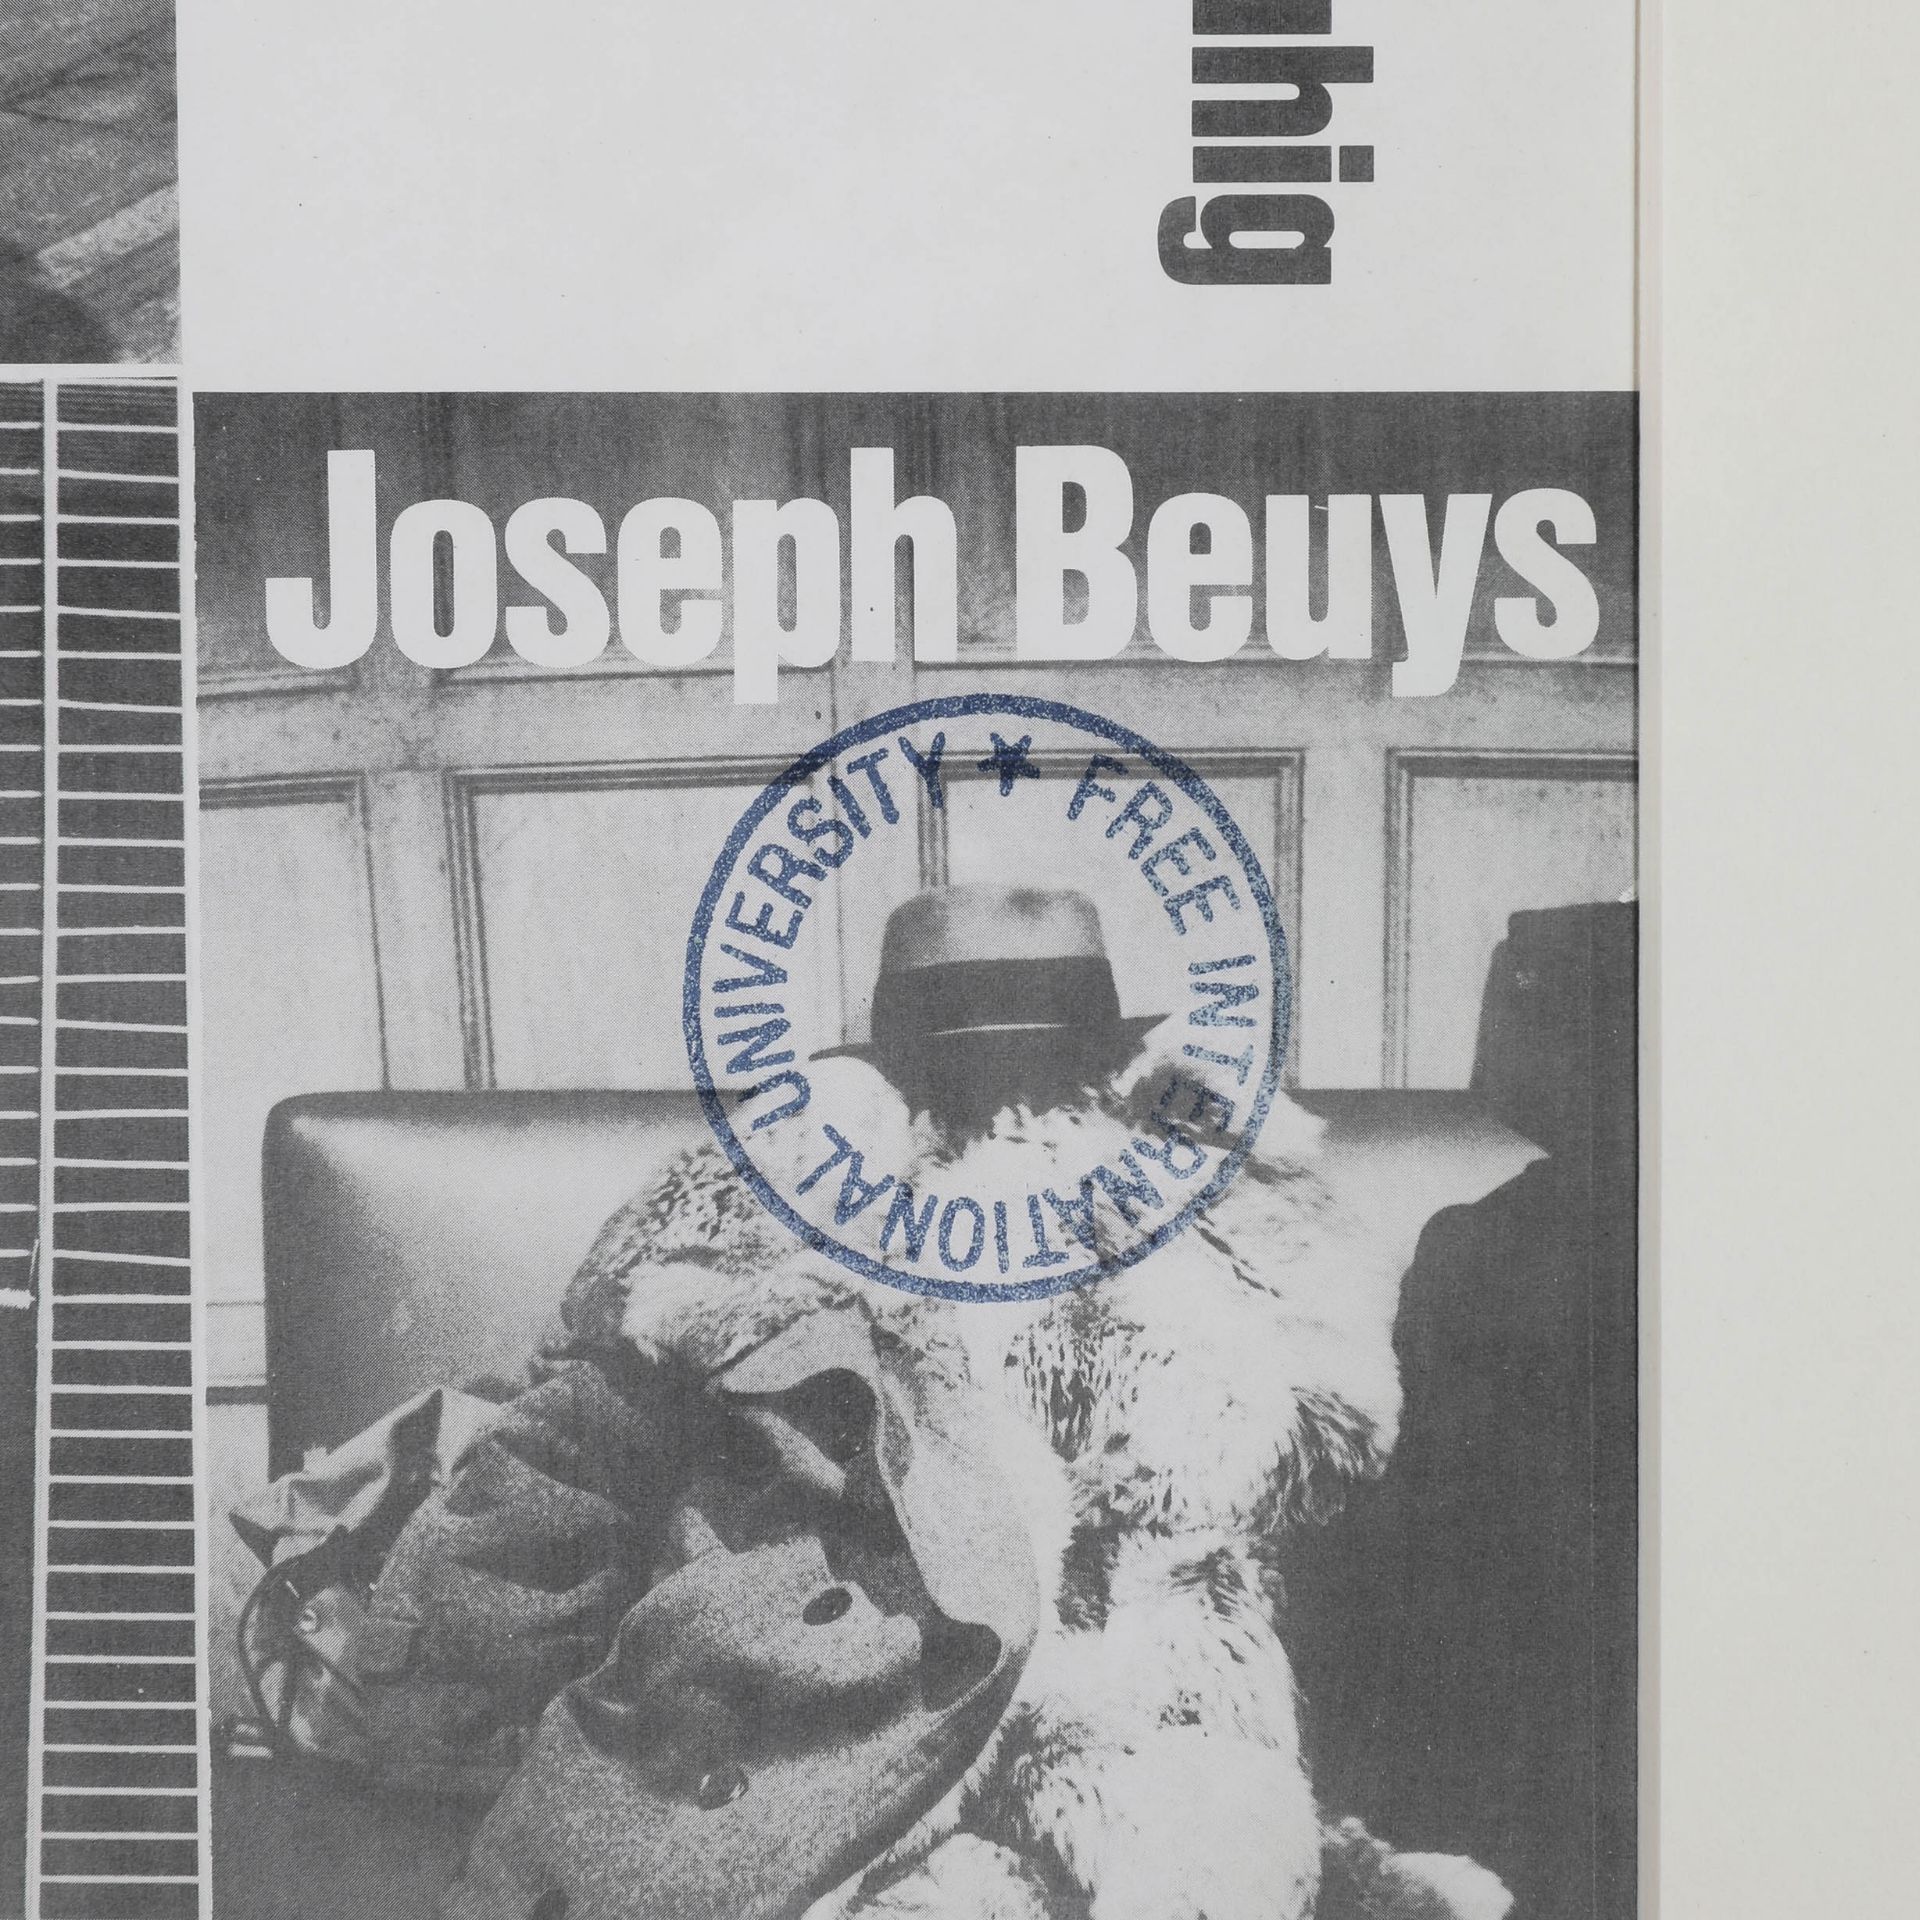 Joseph Beuys*, Klaus Staeck, Nam June Paik, signed proof for postcards, 1974 - Image 3 of 5